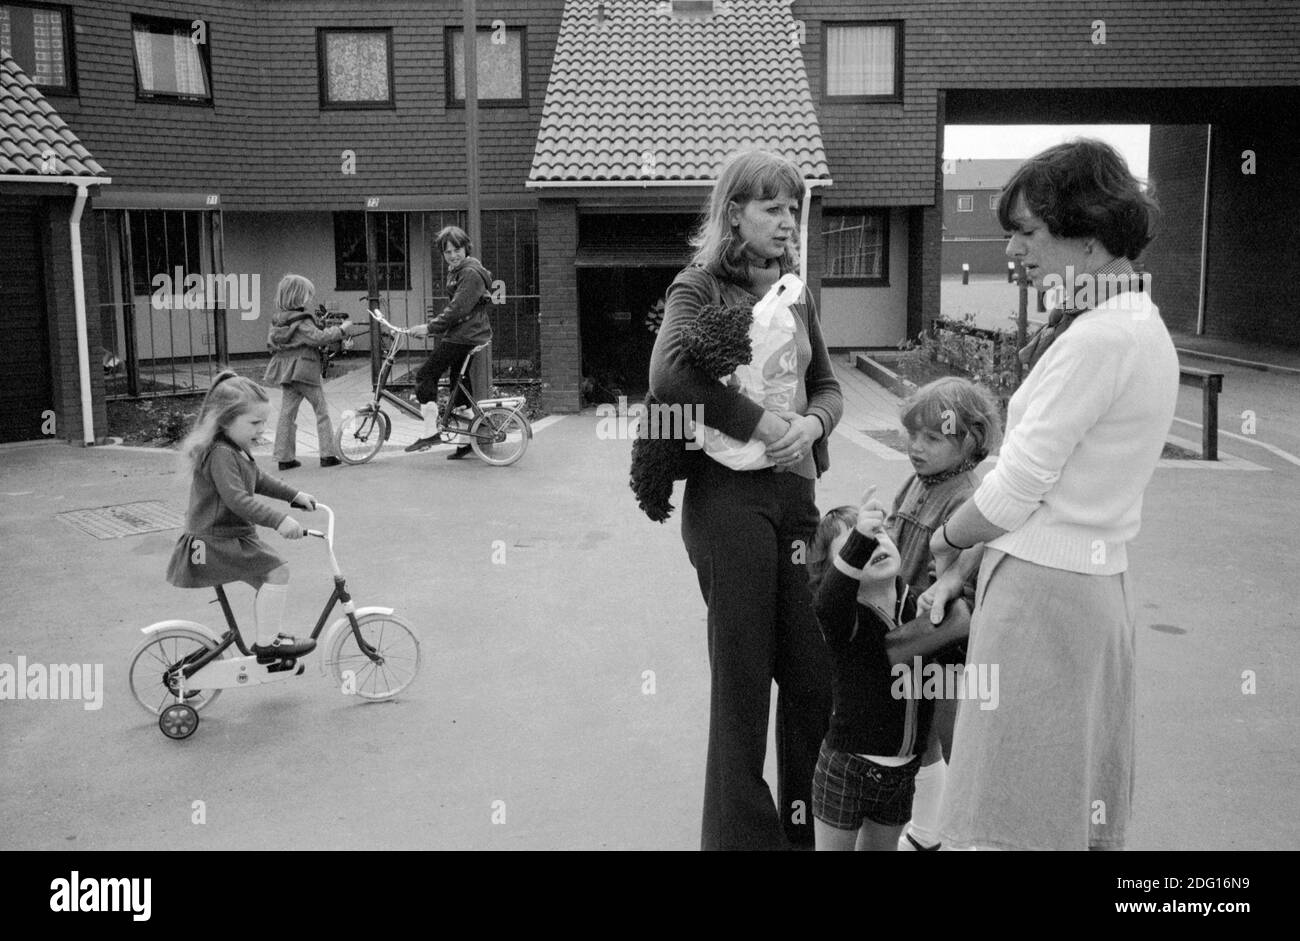 1970s housing estate UK. Two local women with children chatting in the car free street. Kids playing on their bikes. 1977 England. Milton Keynes a new town, a modern housing development Buckinghamshire HOMER SYKES Stock Photo